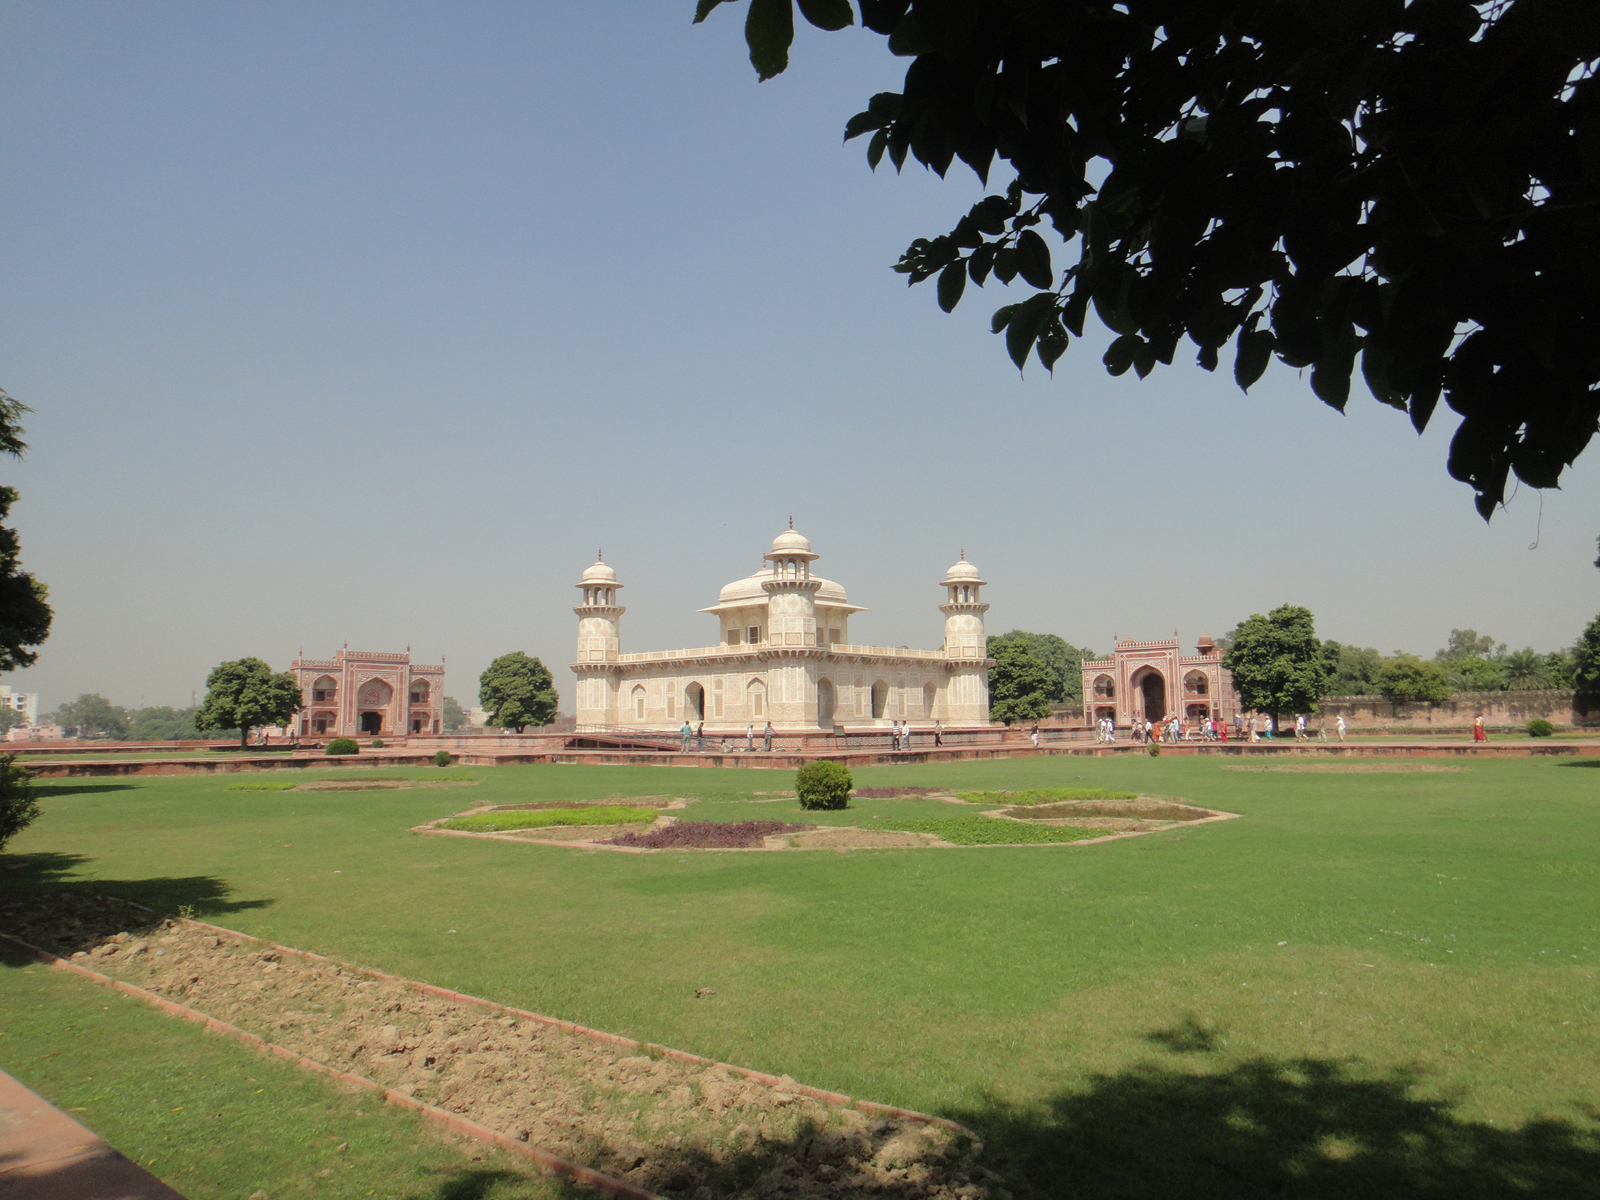 The Garden of the Tomb of I'timad-ud-Daulah, prior to conservation.